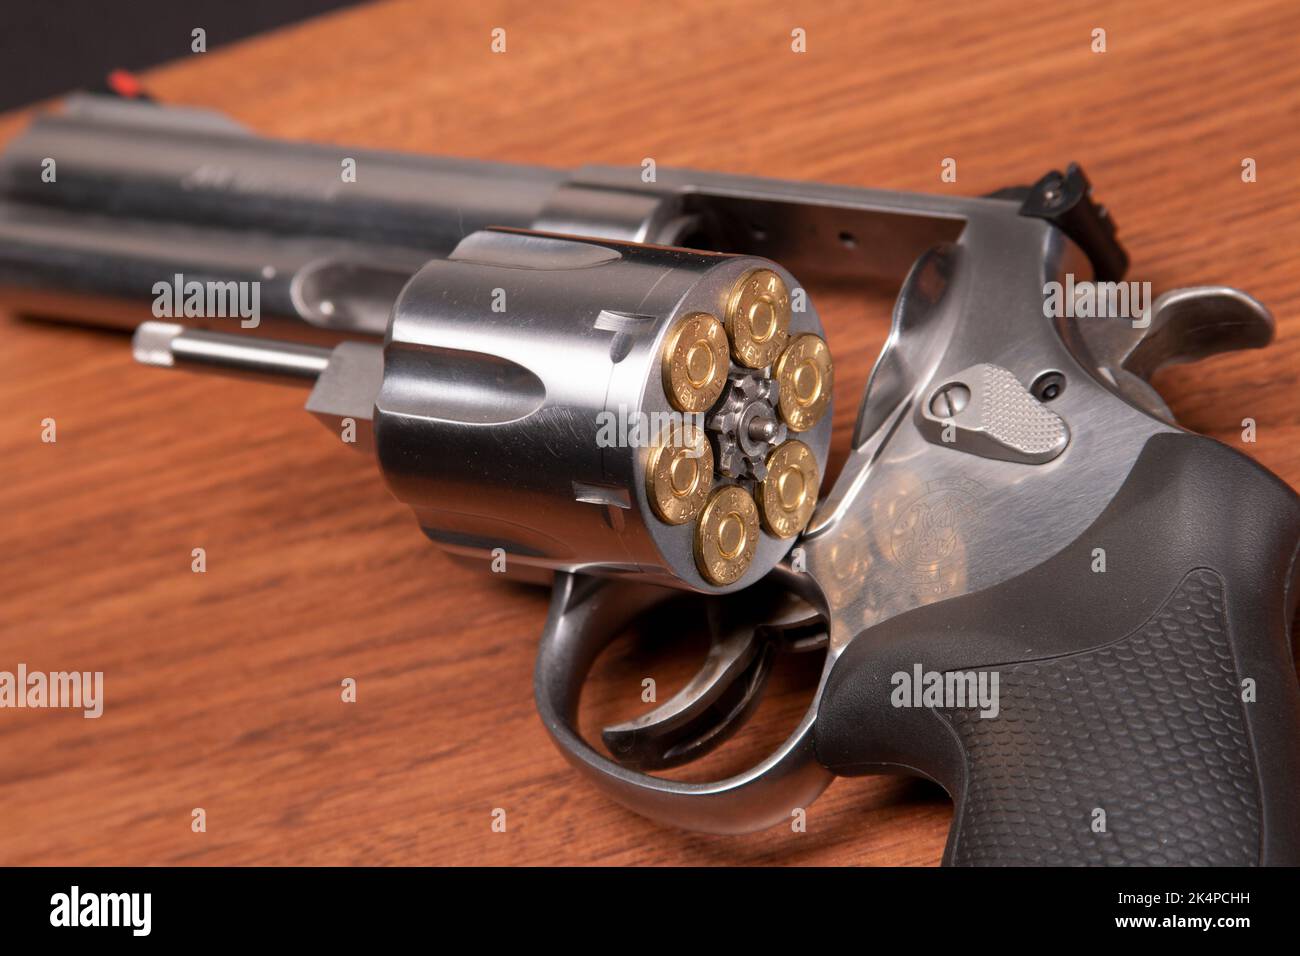 Smith and Wesson Model 629-6 5' Classic Stock Photo